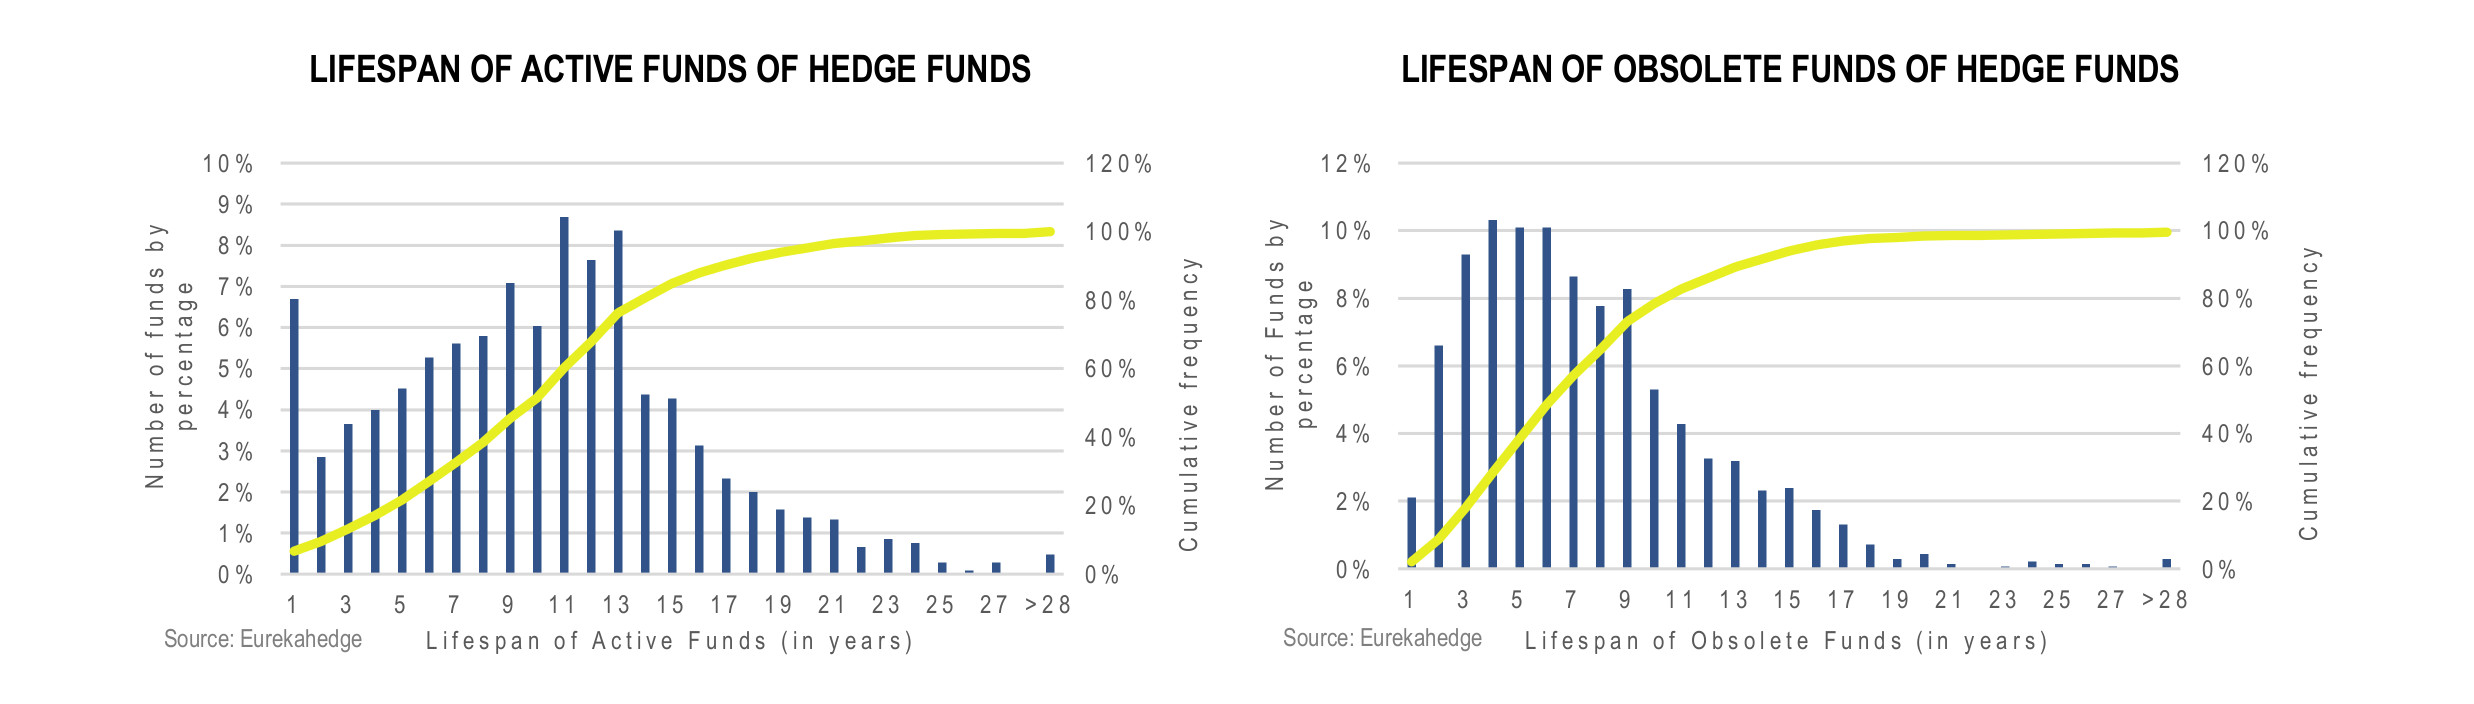 Global Funds of Hedge Fund Infographic May 2017 - Lifespan of Active and Obsolete Fund of Hedge Funds